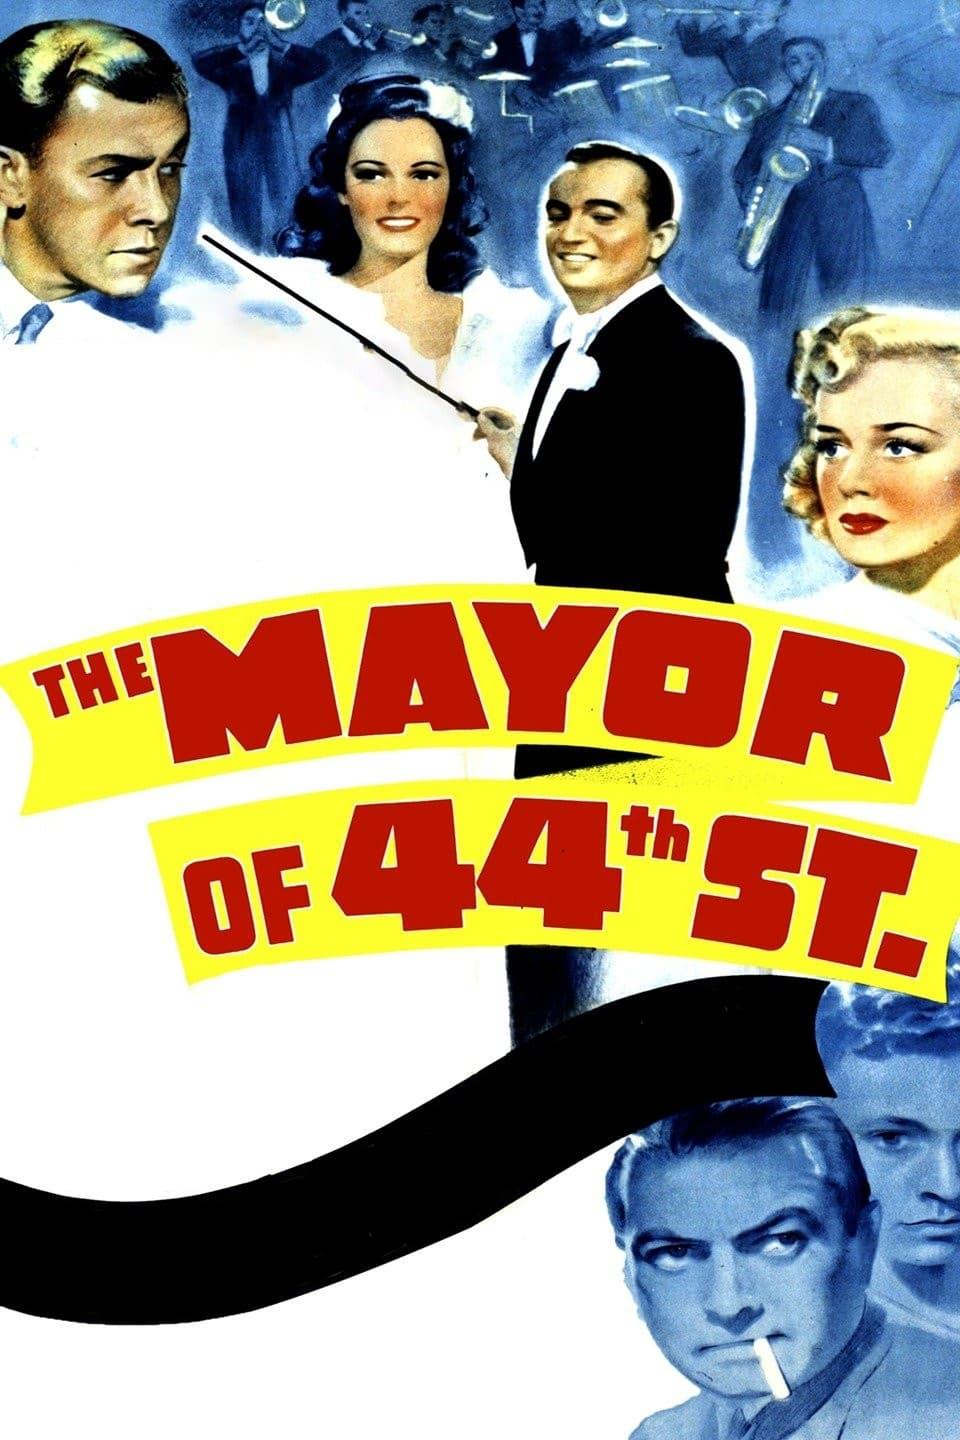 The Mayor of 44th Street poster